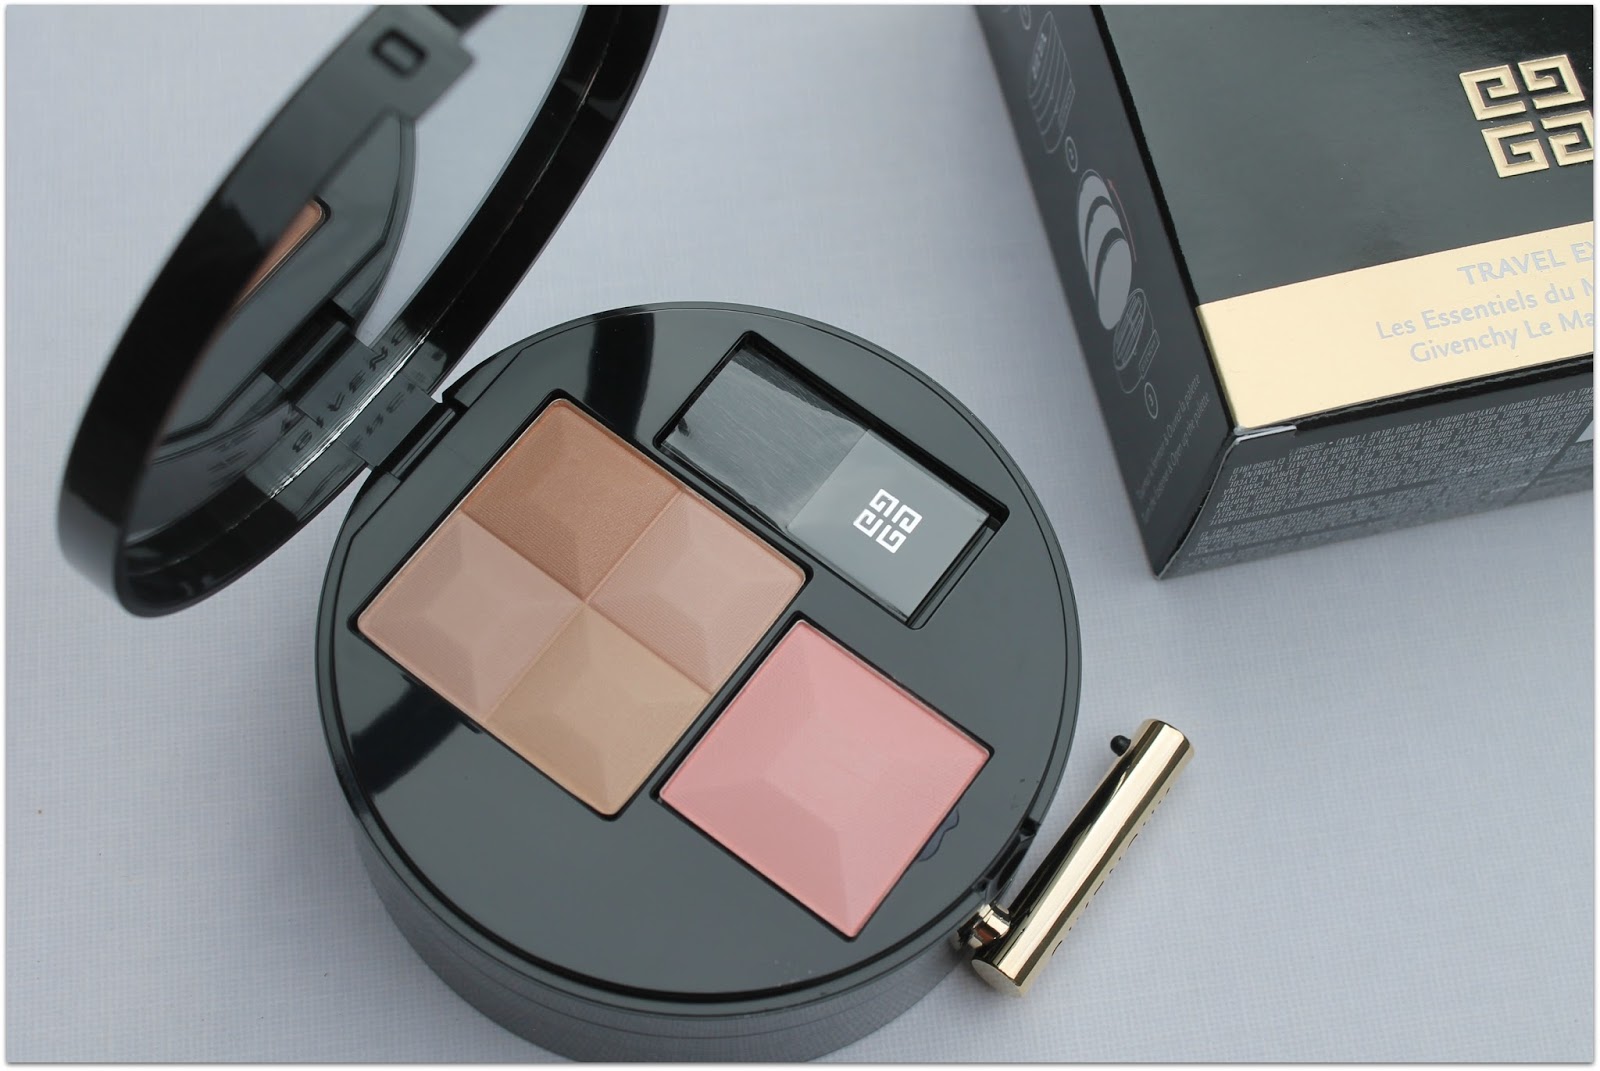 givenchy makeup essentials palette with travel mascara